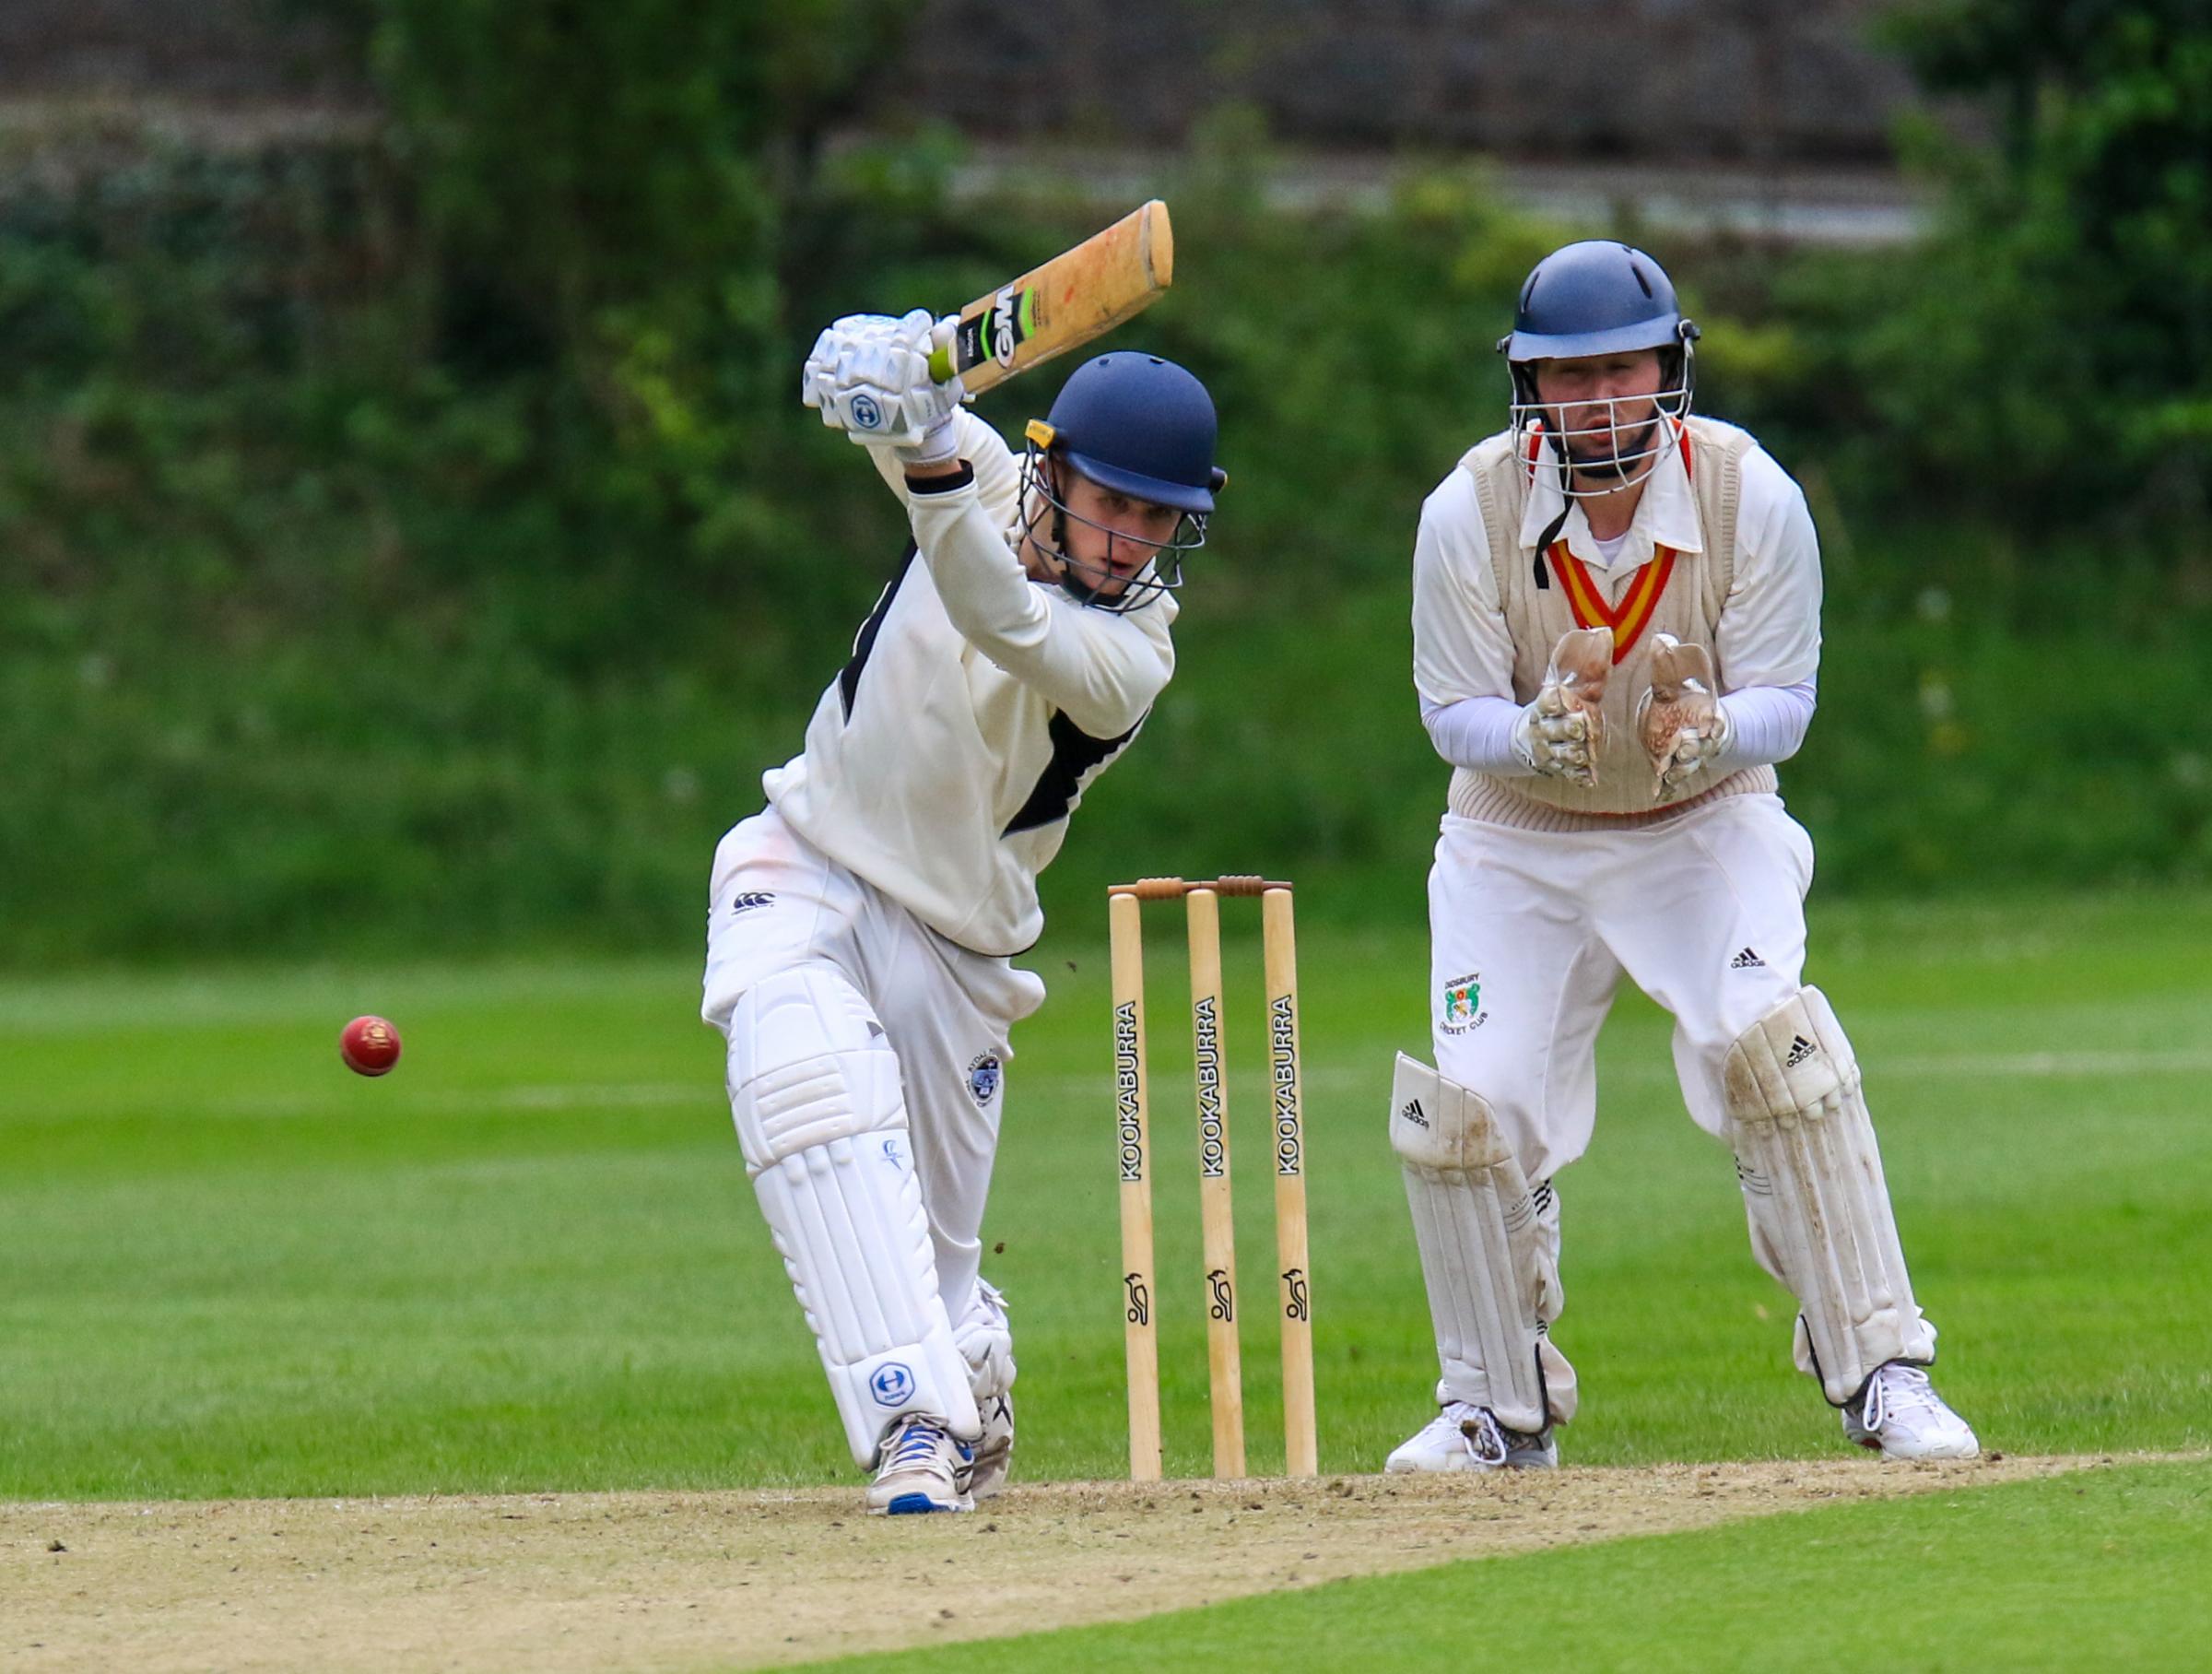 Penrhos Ryda School batsman smashes the red ball back at the bowler. Picture: Tony